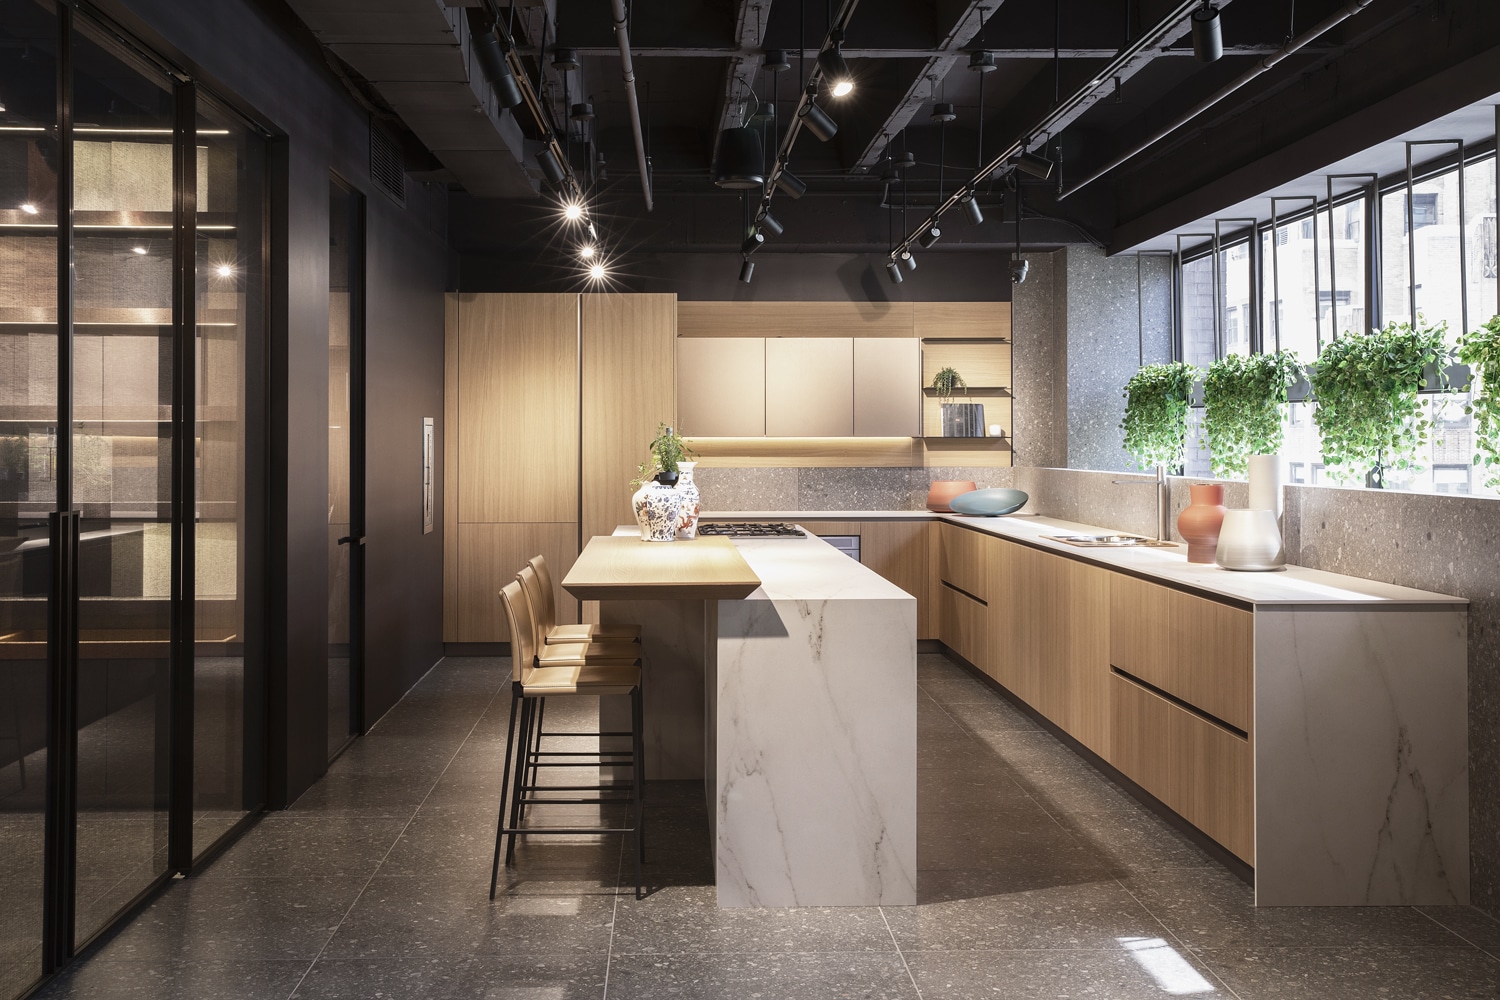 MandiCasa New York kitchen display with Kappa + Yota cabinets in X-Duna wood and Rame metal lacquer.